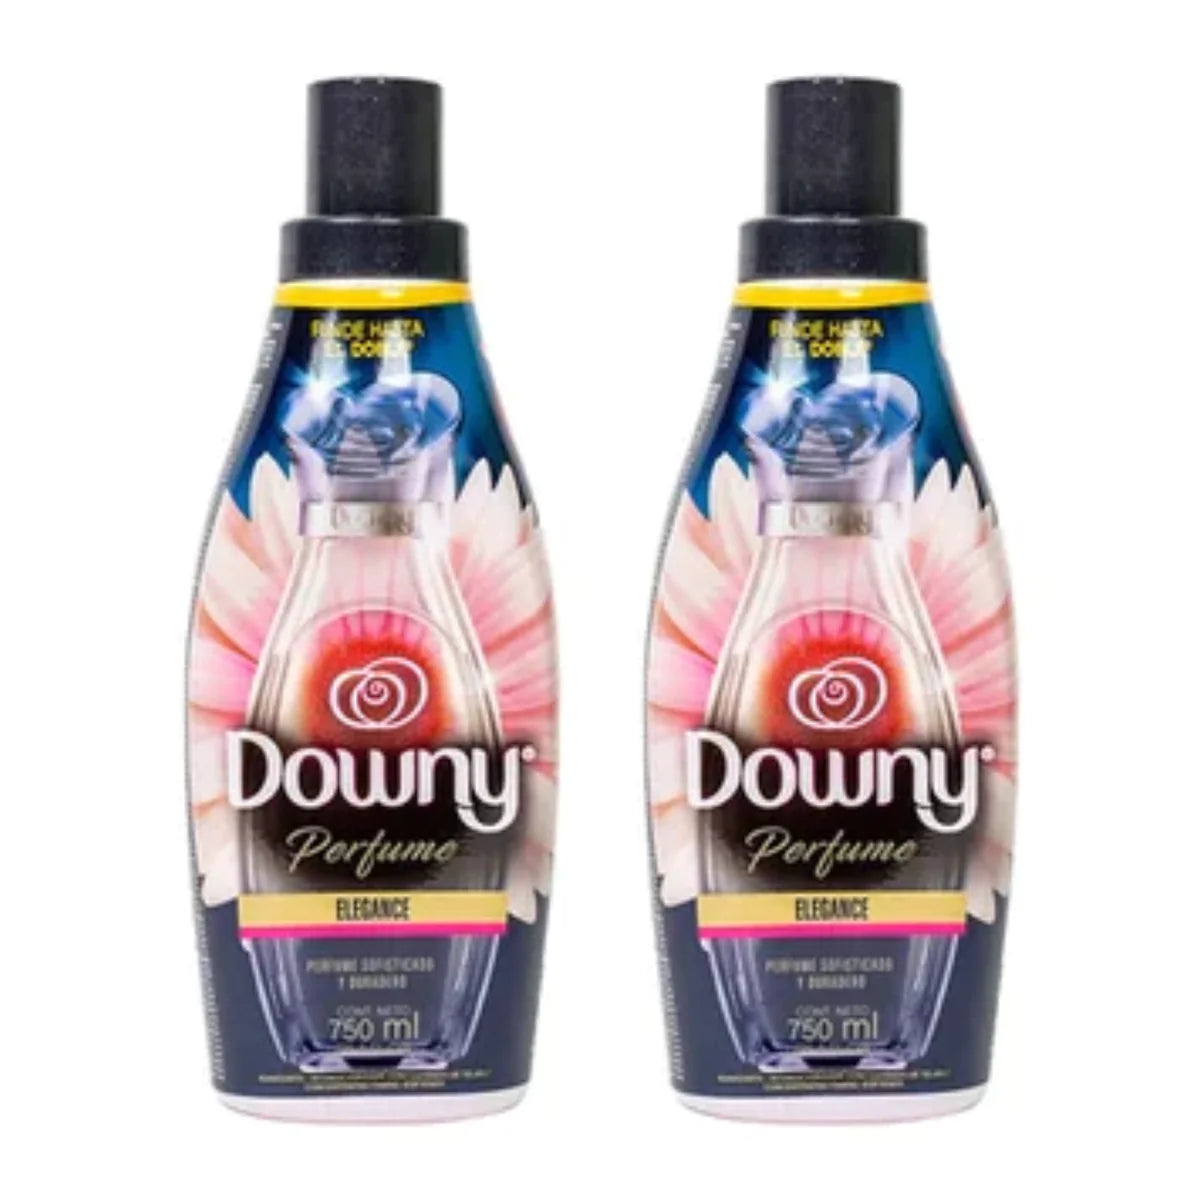 Downy Fabric Softener ( Perfume Collection )